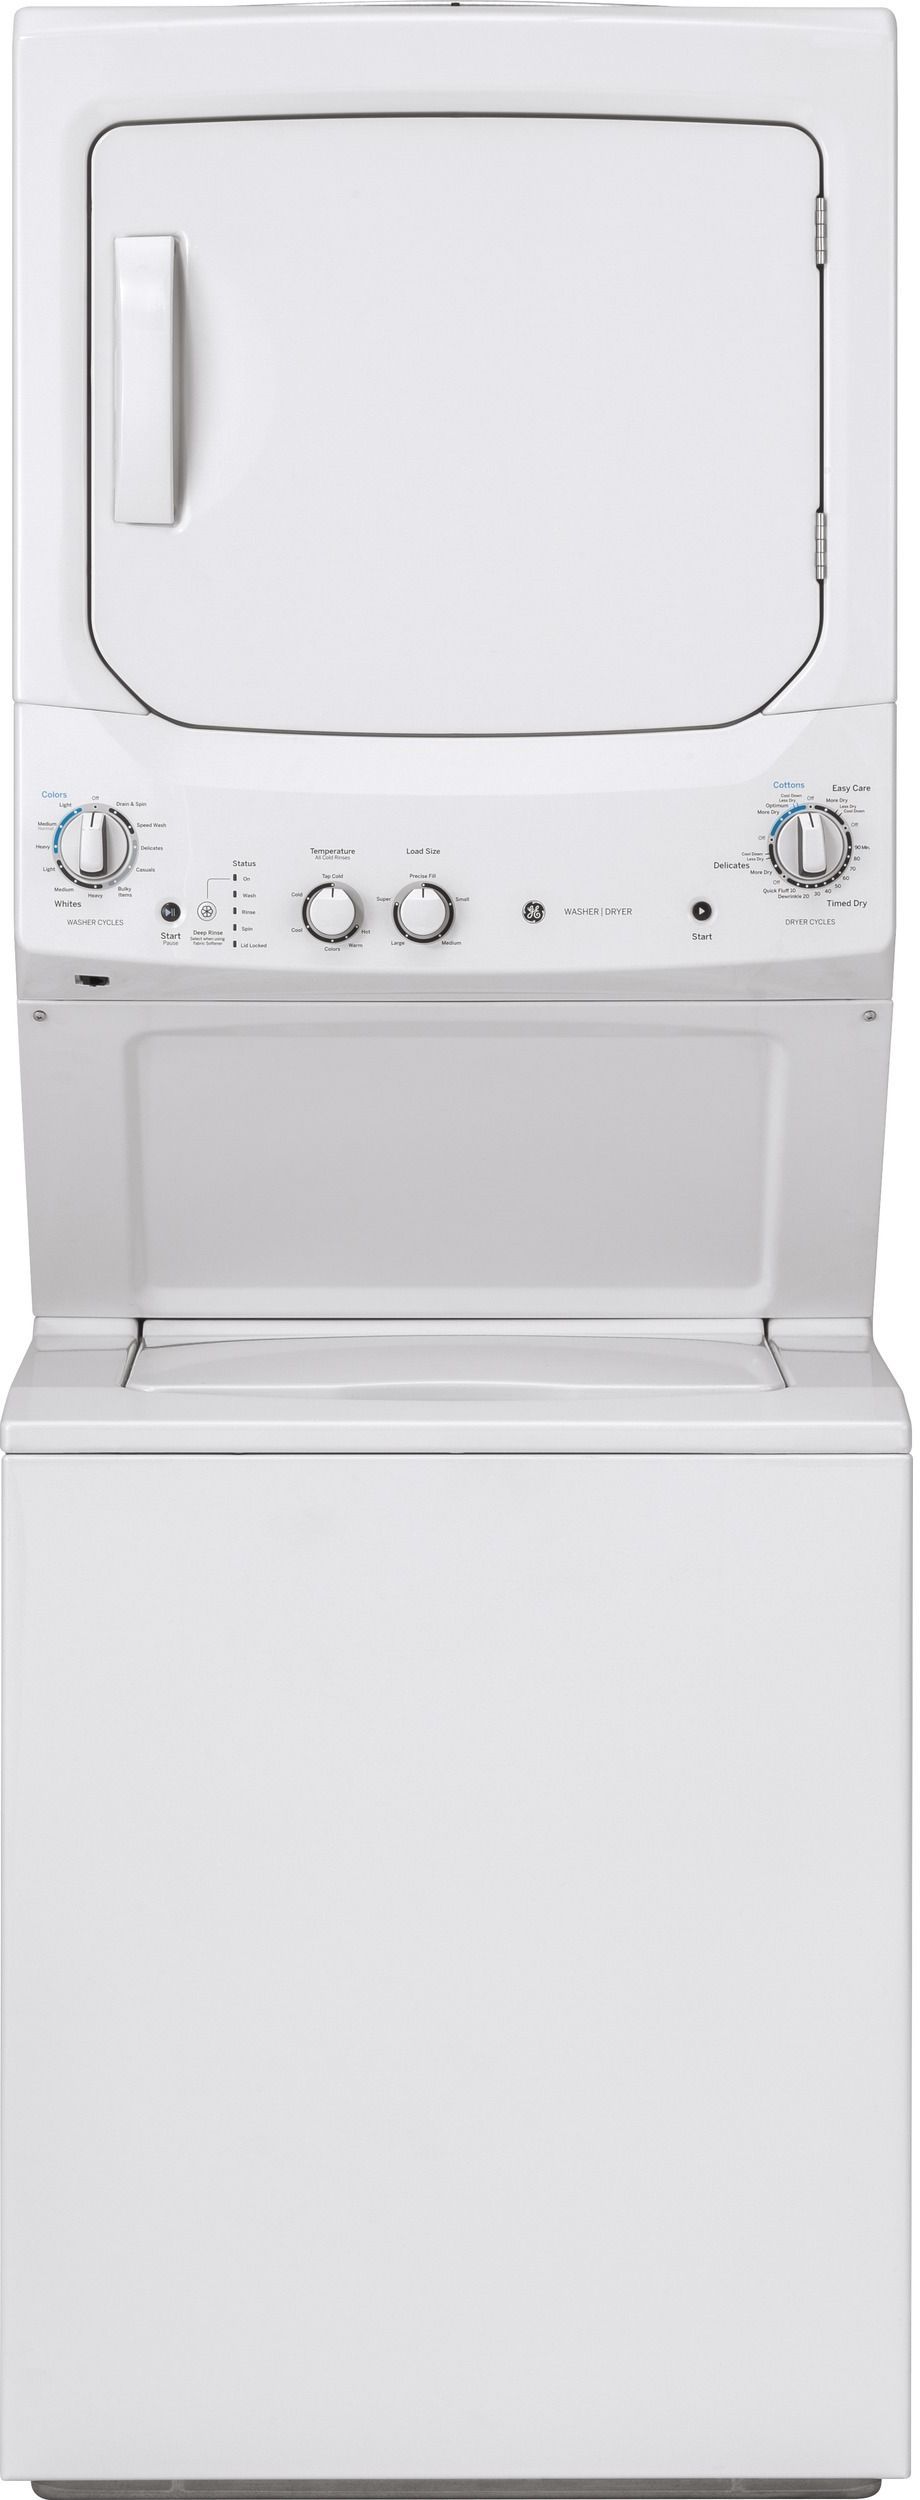 GE® Unitized Spacemaker® 3.8 Cu. Ft. Washer, 5.9 Cu. Ft. White On White Electric Dryer